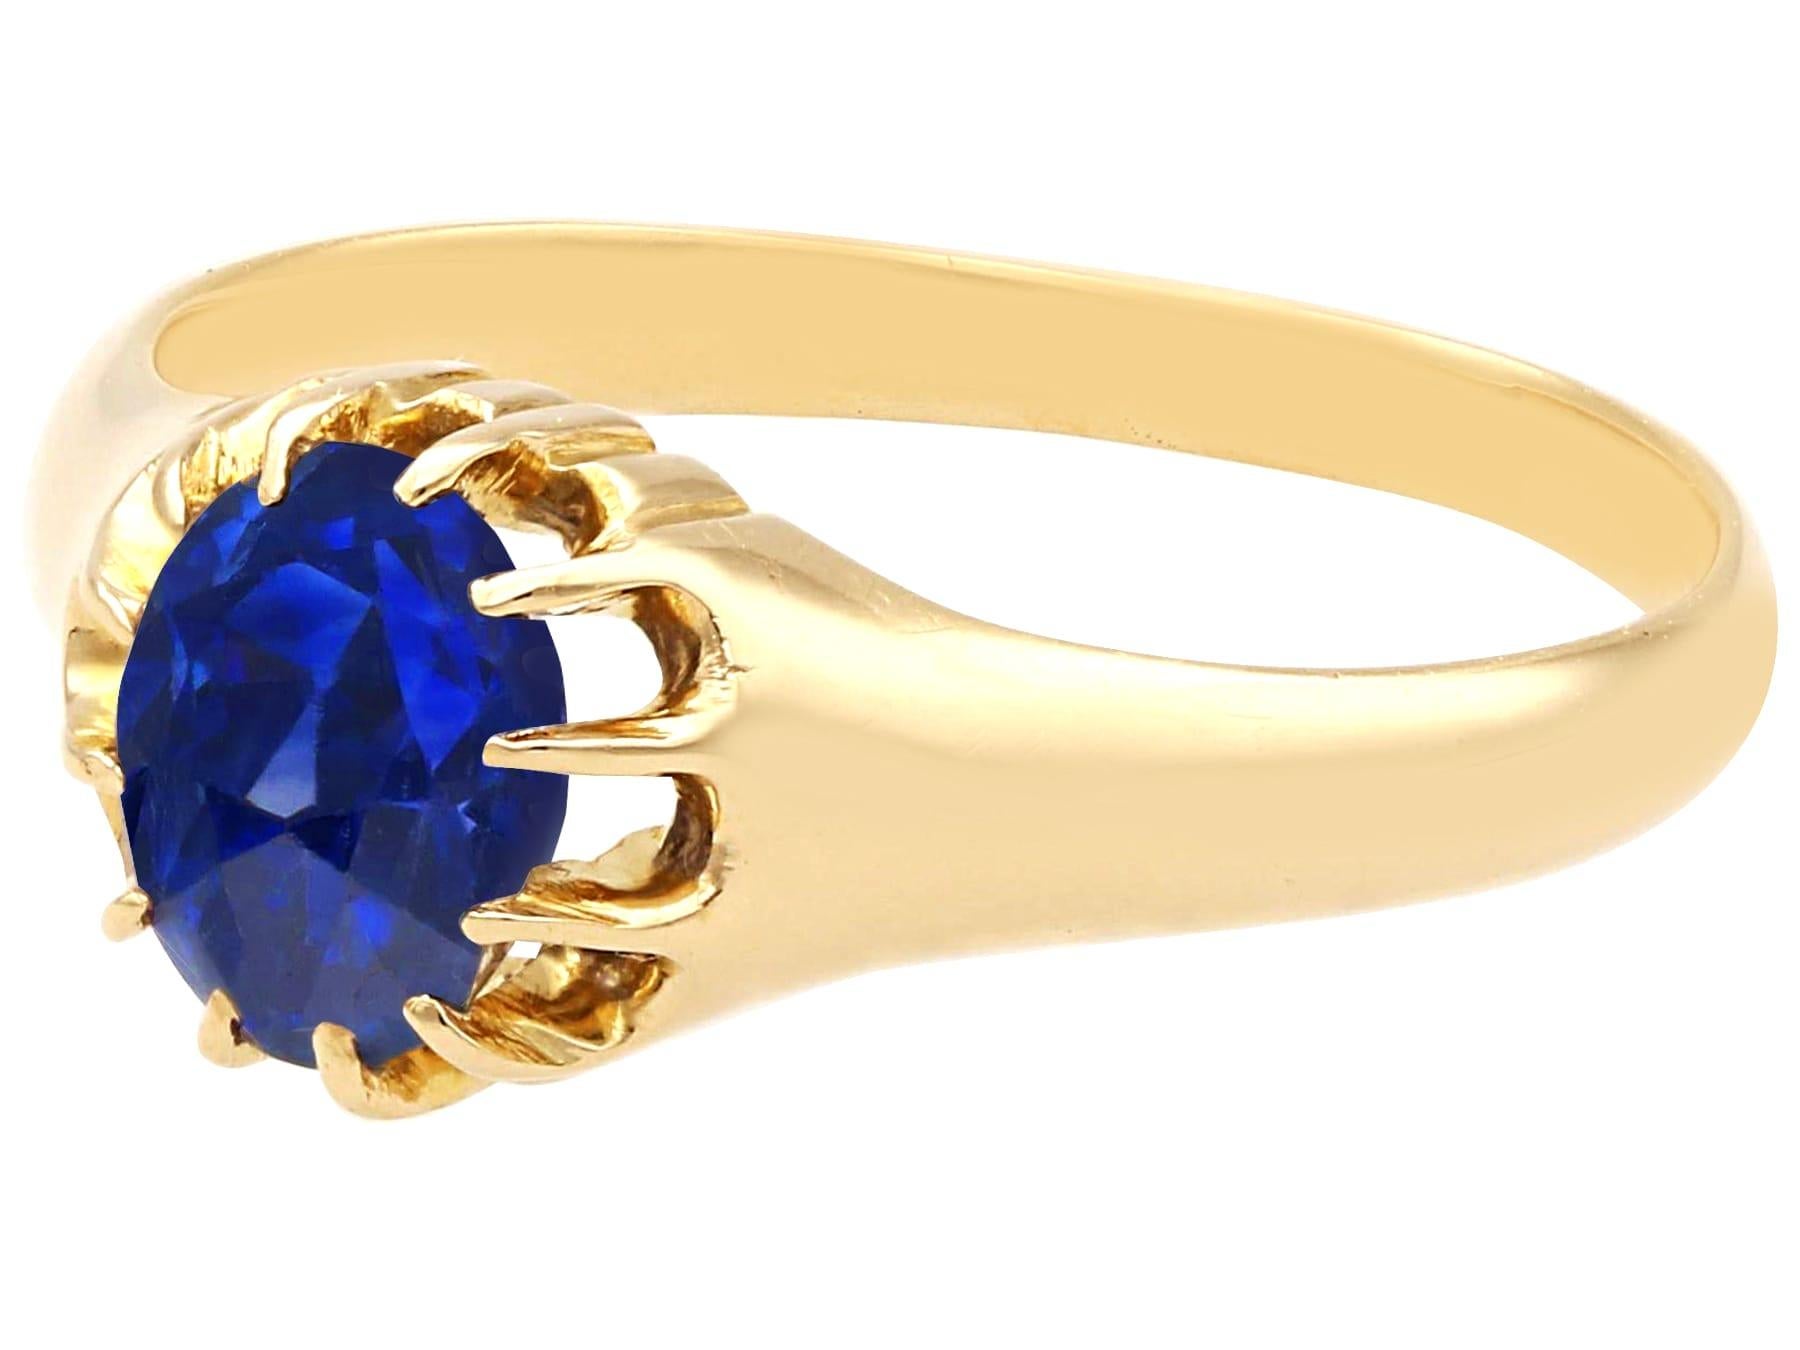 Oval Cut Antique 1.42 Carat Basaltic Sapphire and 14k Yellow Gold Ring, circa 1910 For Sale